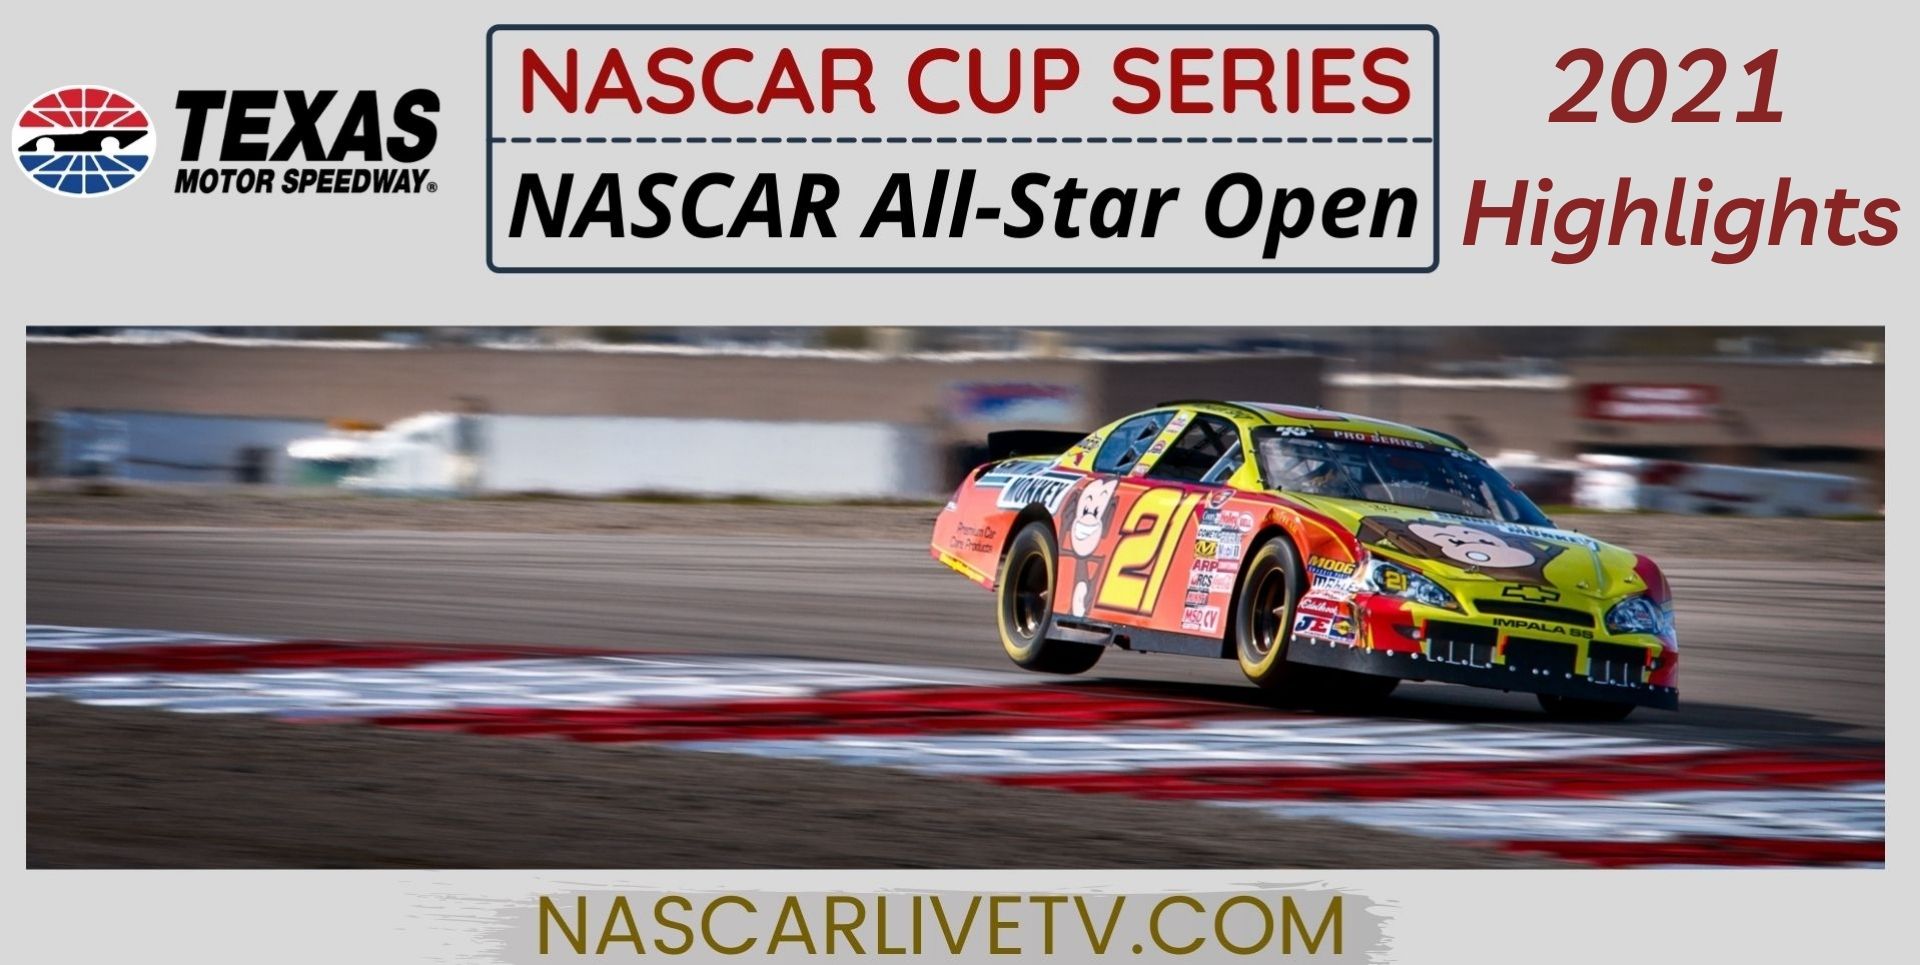 All Star Open Highlights NASCAR Cup Series 2021